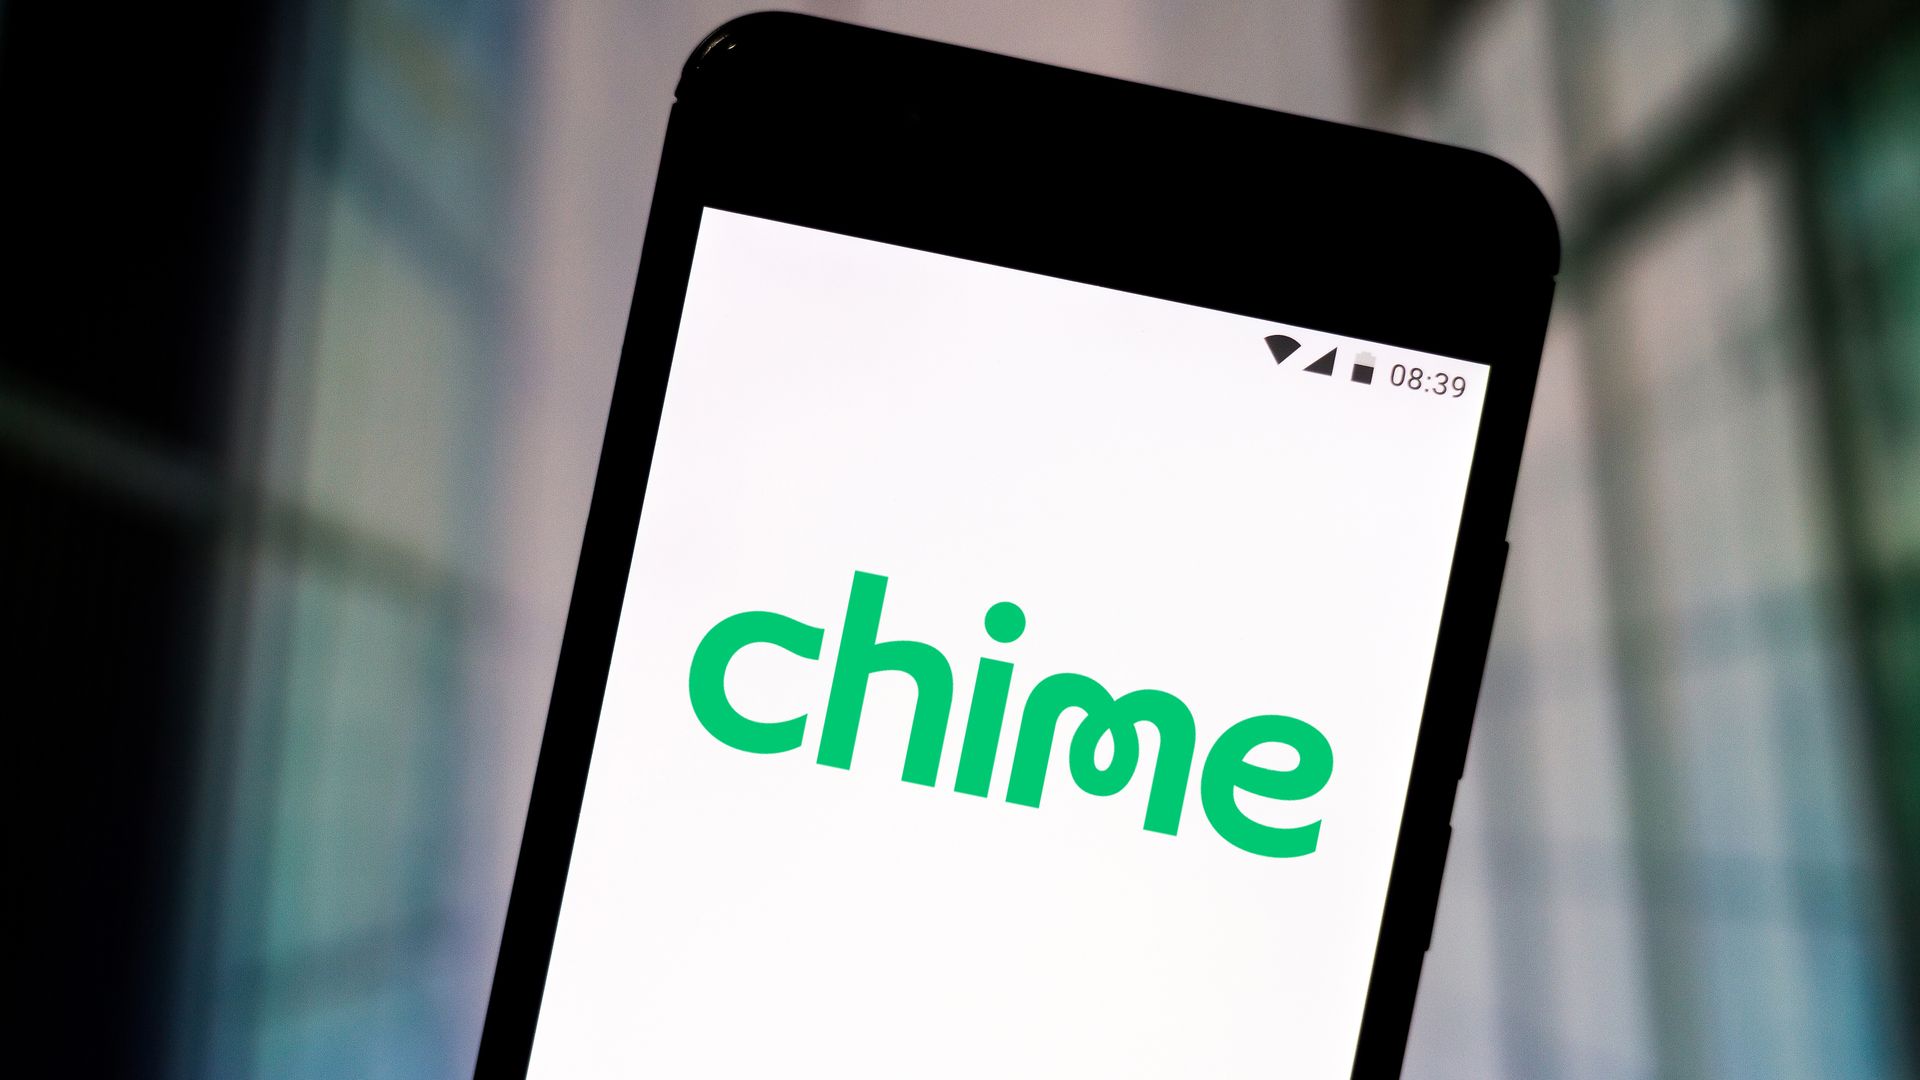 Chime mobile banking logo on a smartphone.